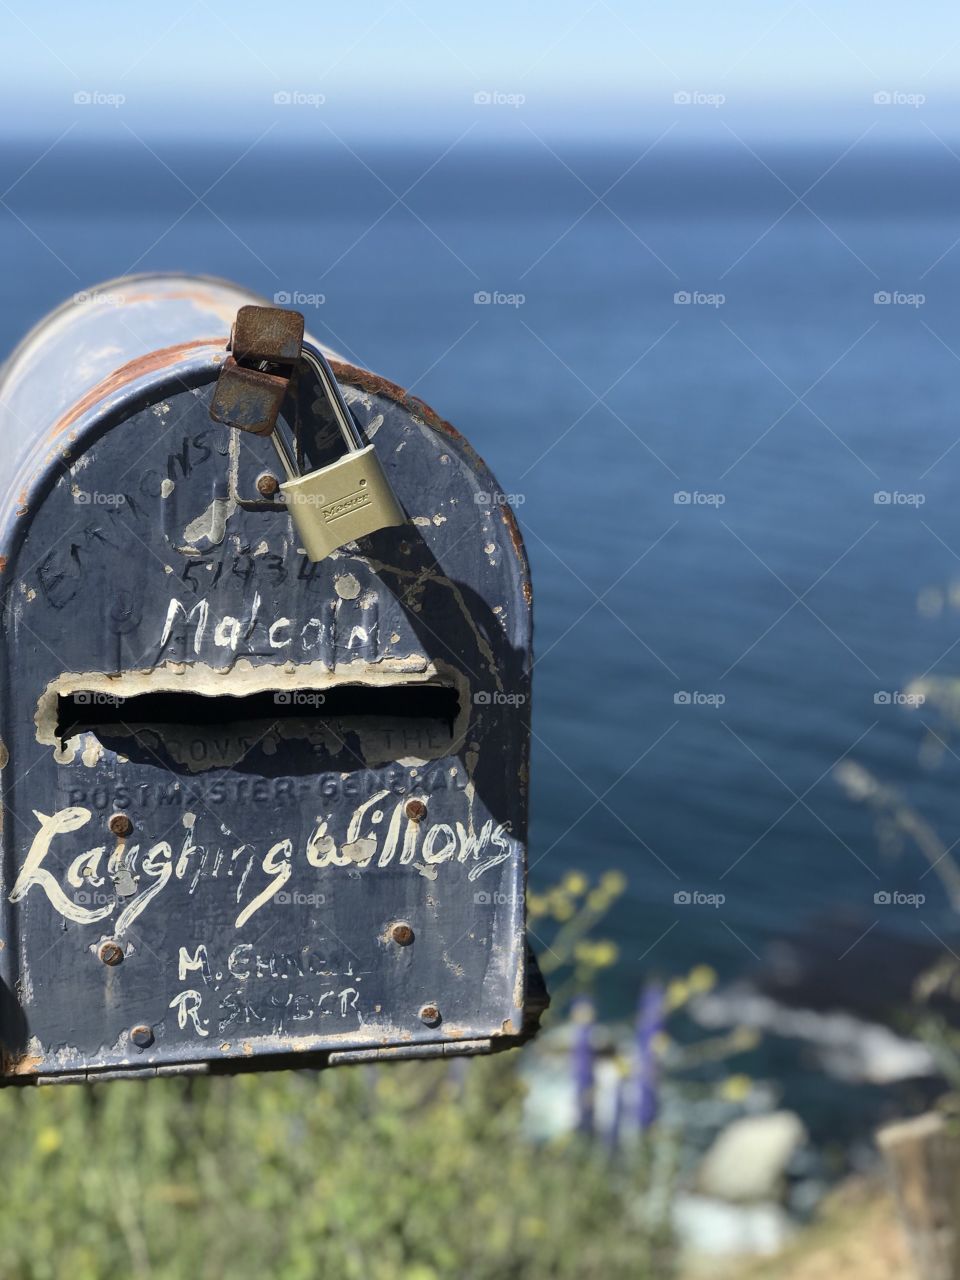 A detailed look at an ordinary mailbox. The aged and rusted metal and chipped paint create a work of art that is accentuated by the blue ocean behind it. 